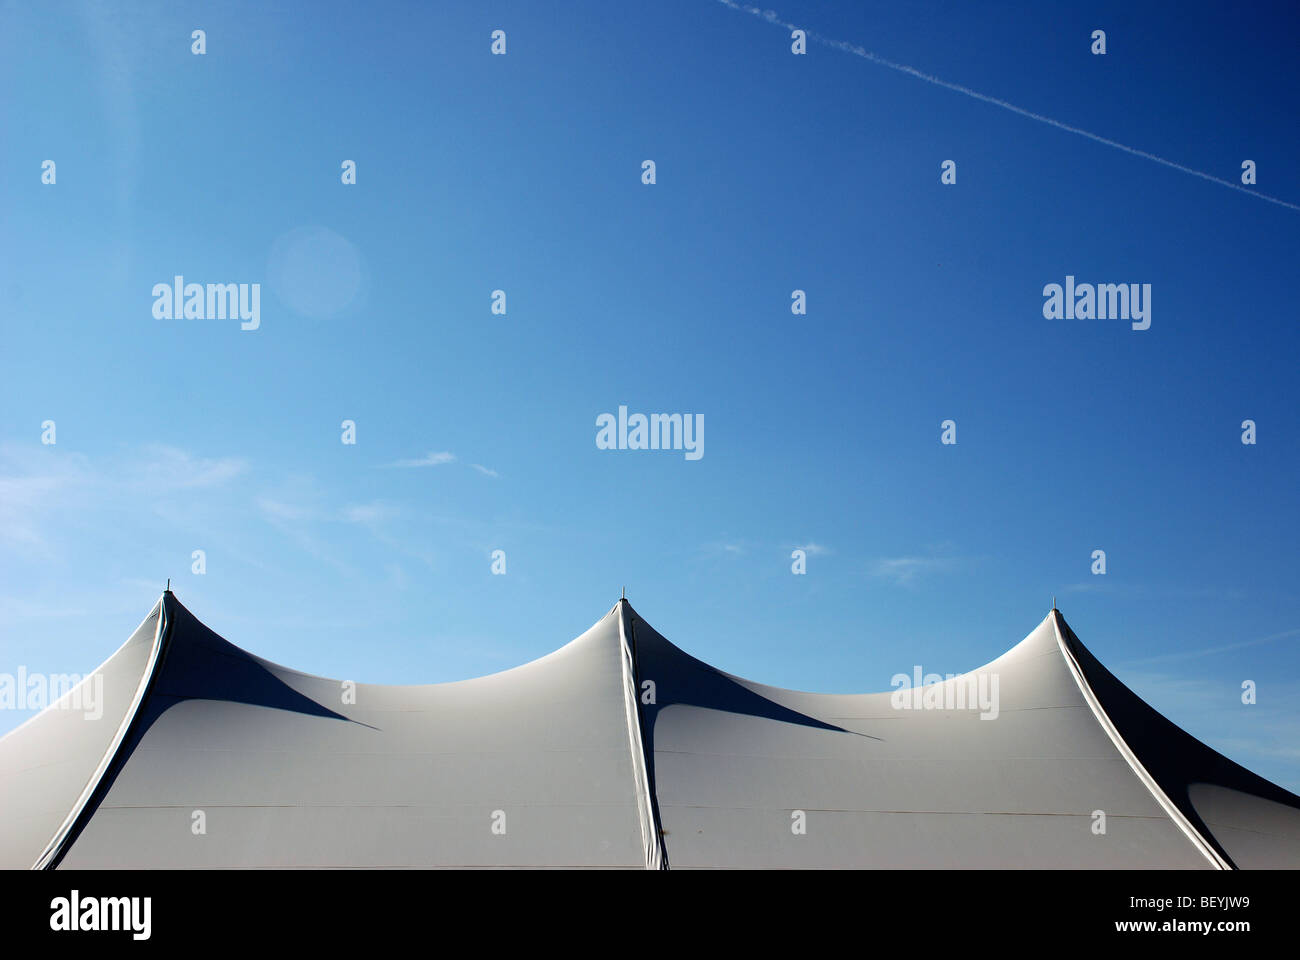 Tent against blue sky Stock Photo